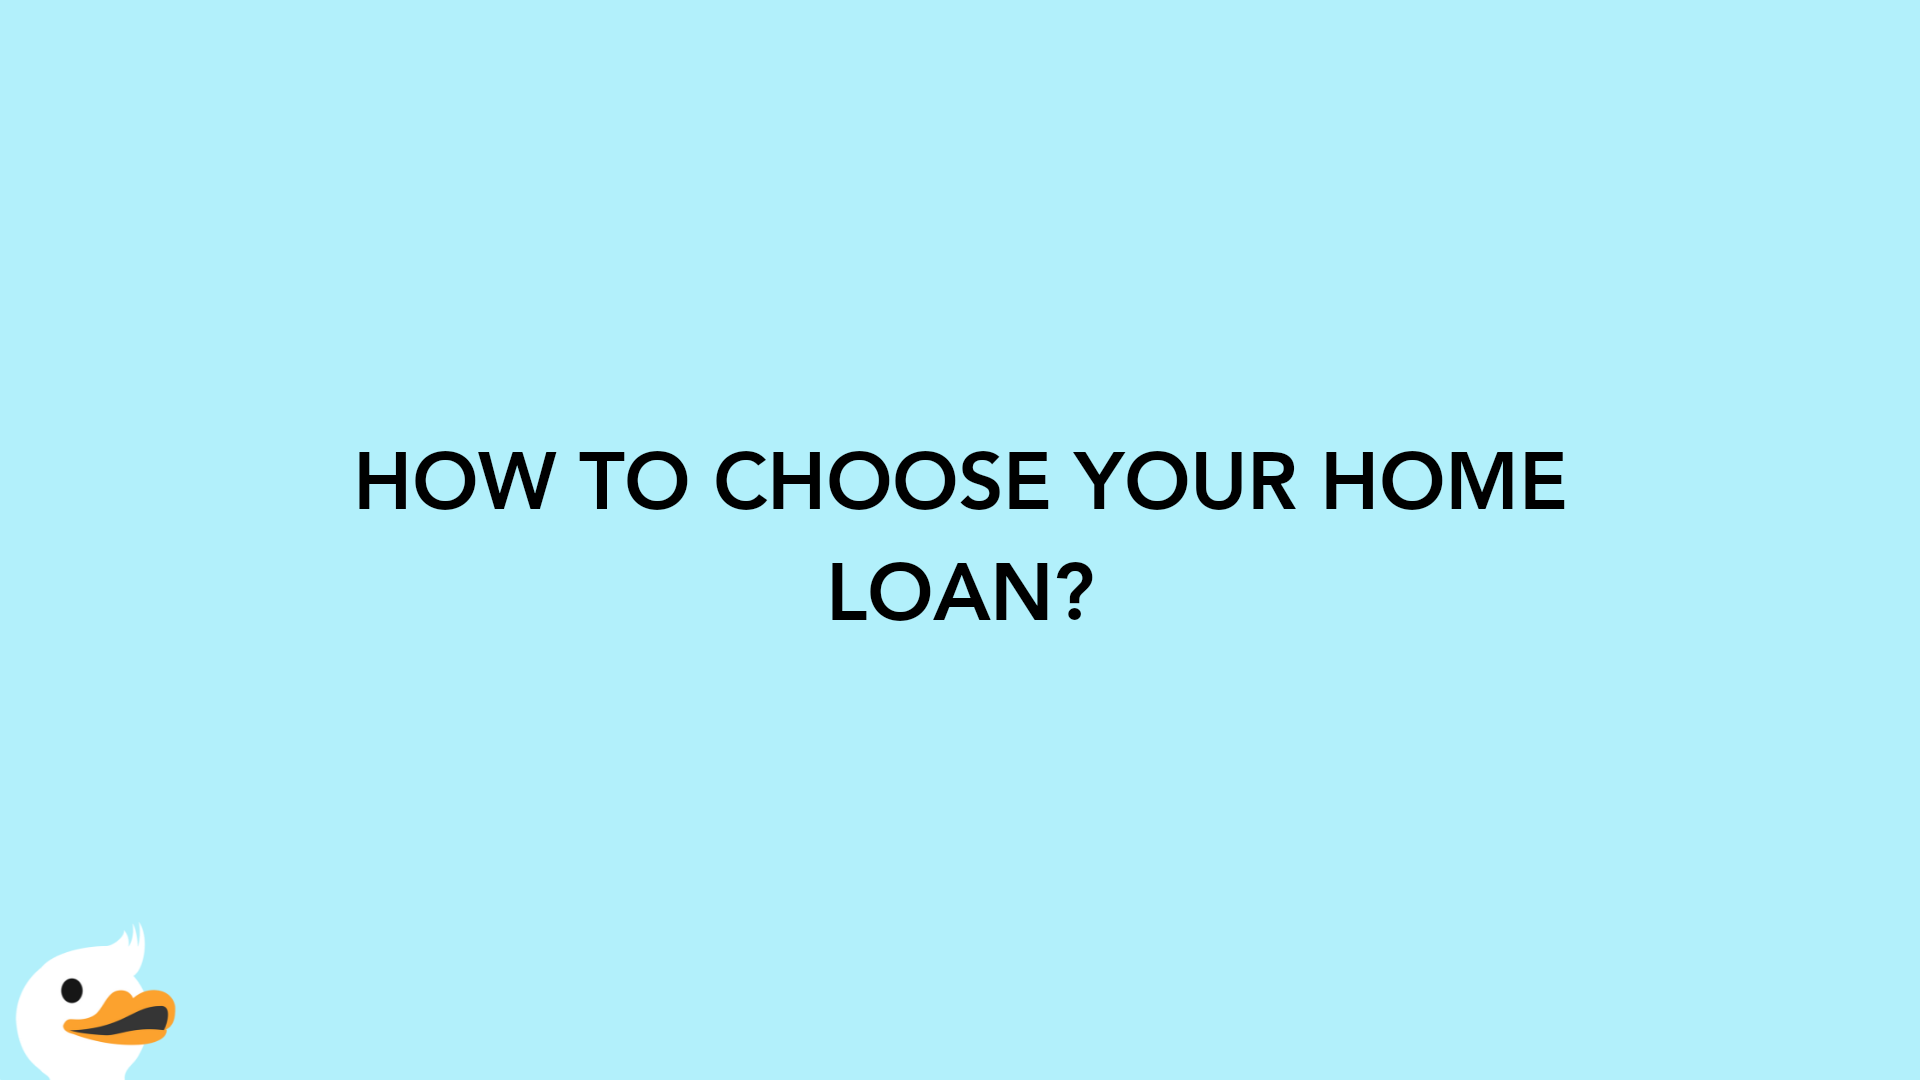 HOW TO CHOOSE YOUR HOME LOAN?